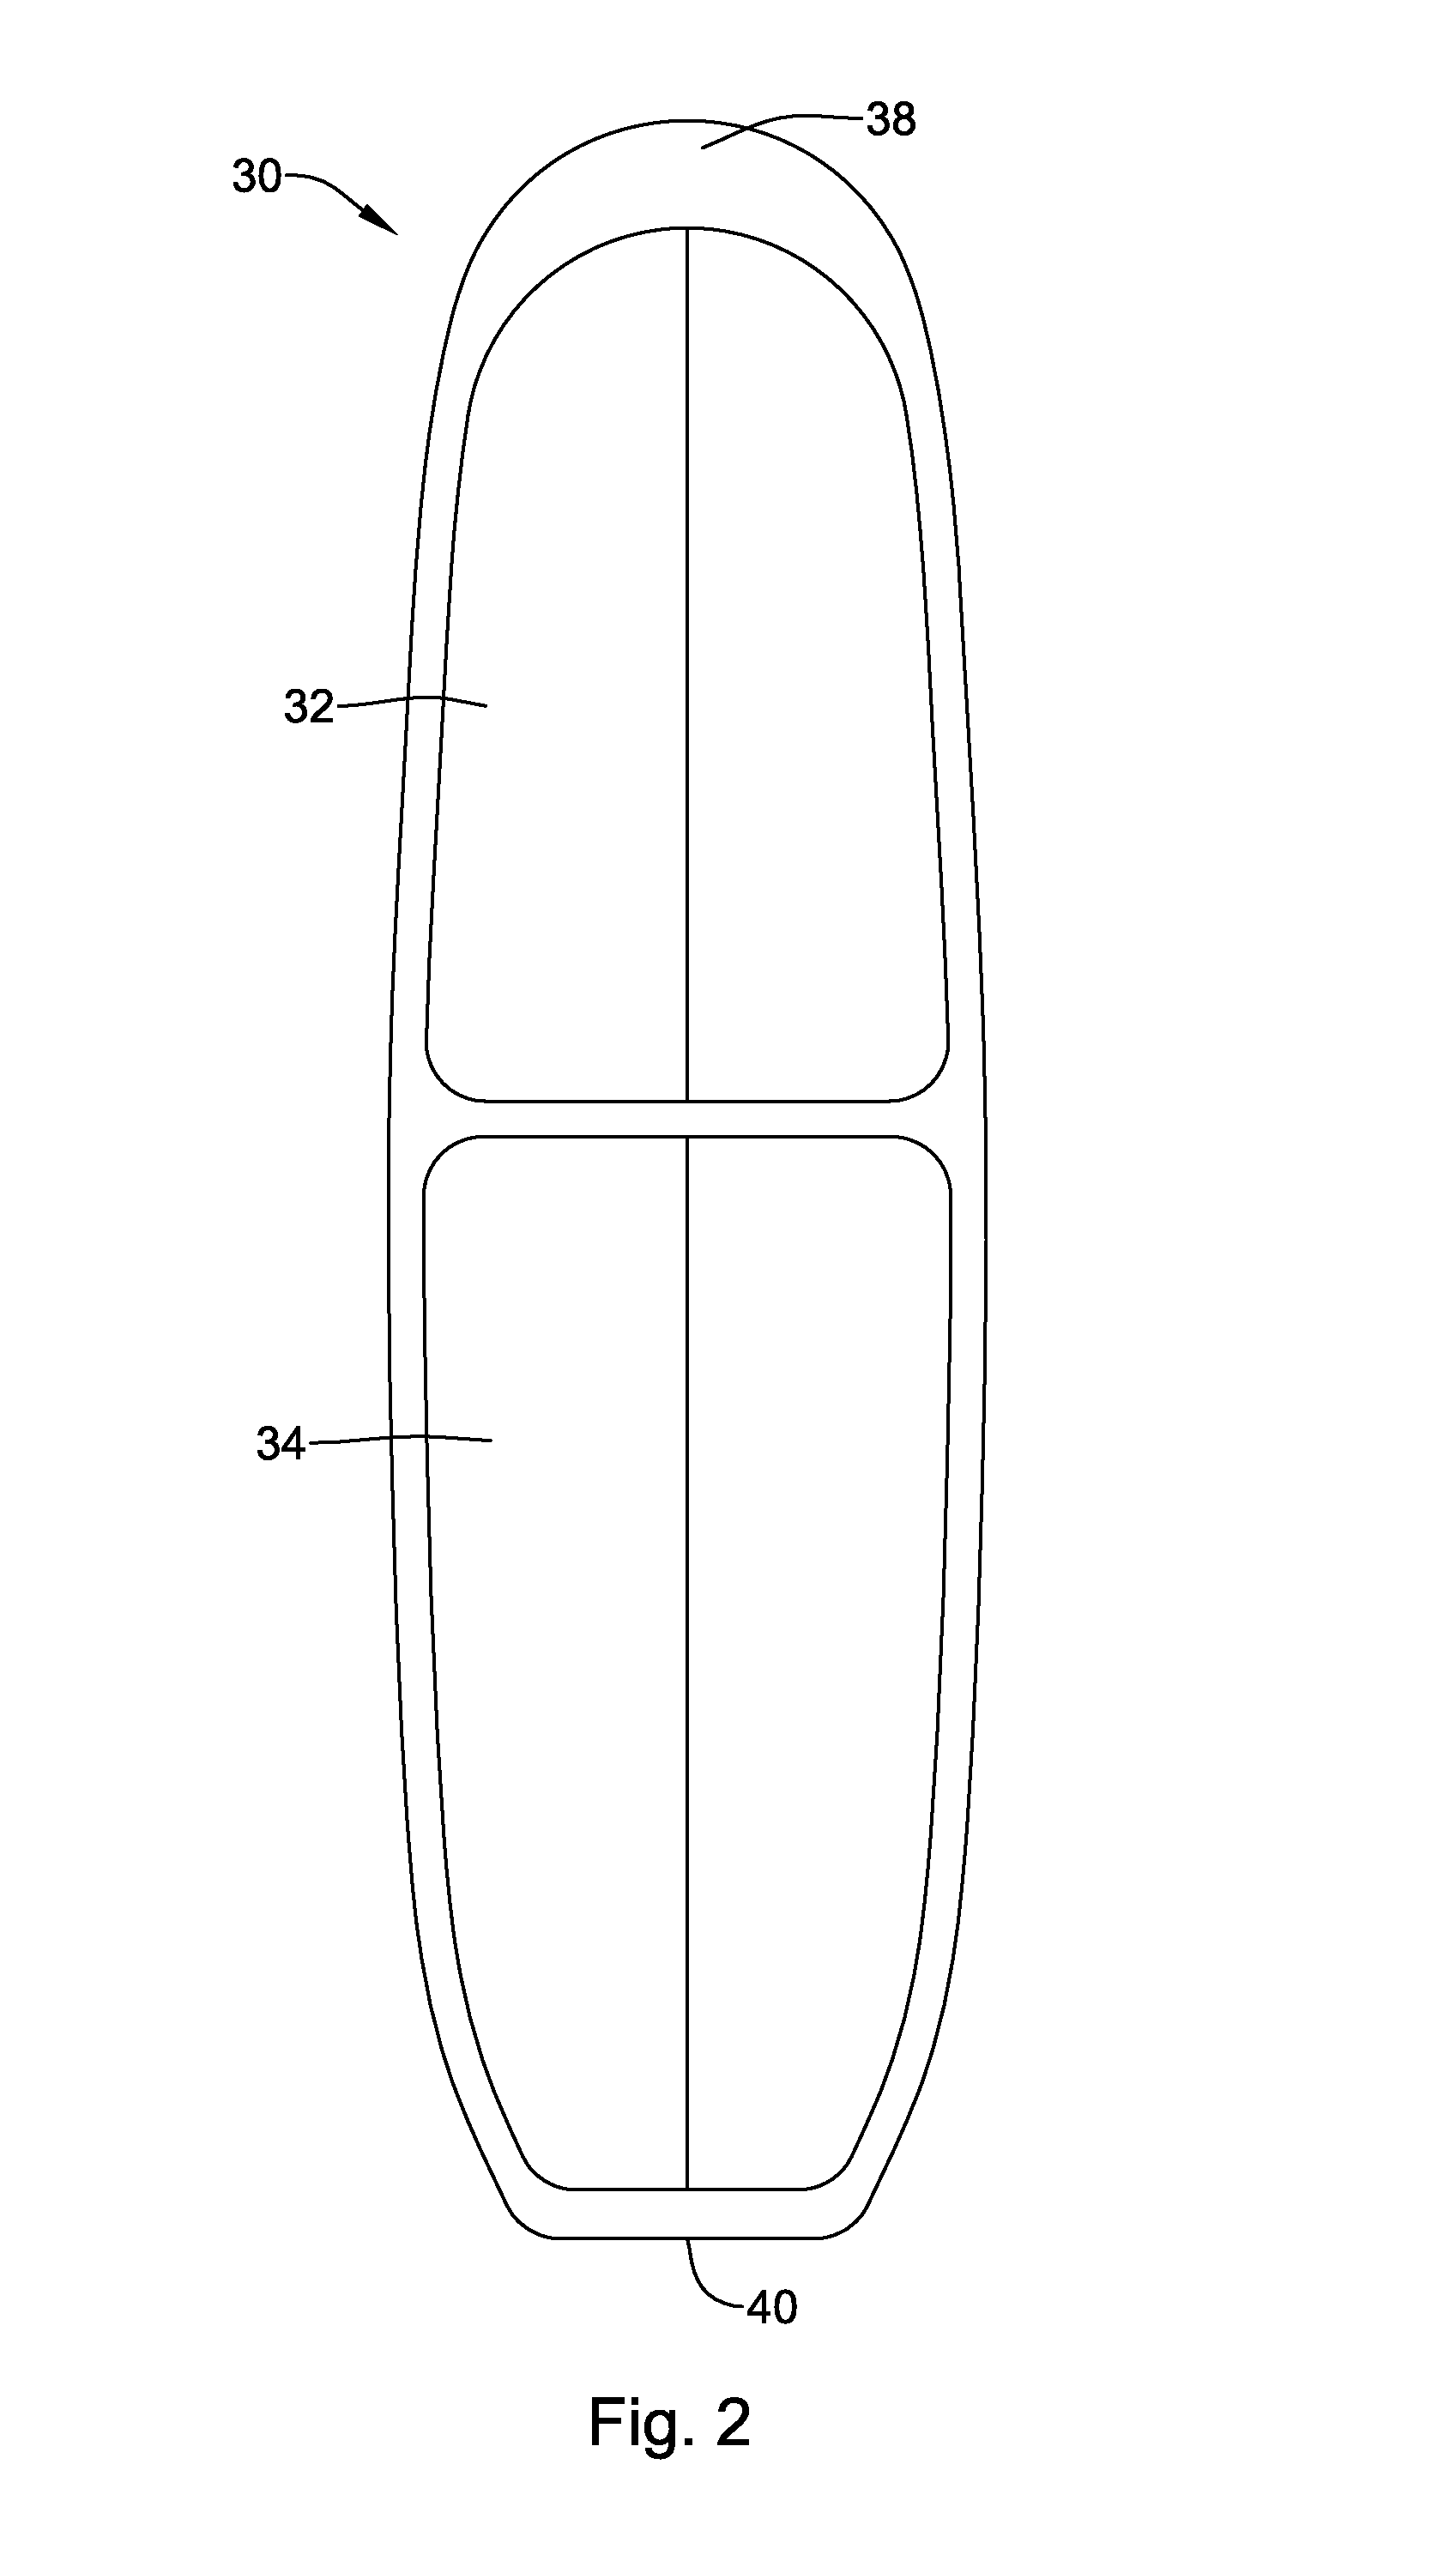 Methods and systems for selective wax application on a sports implement